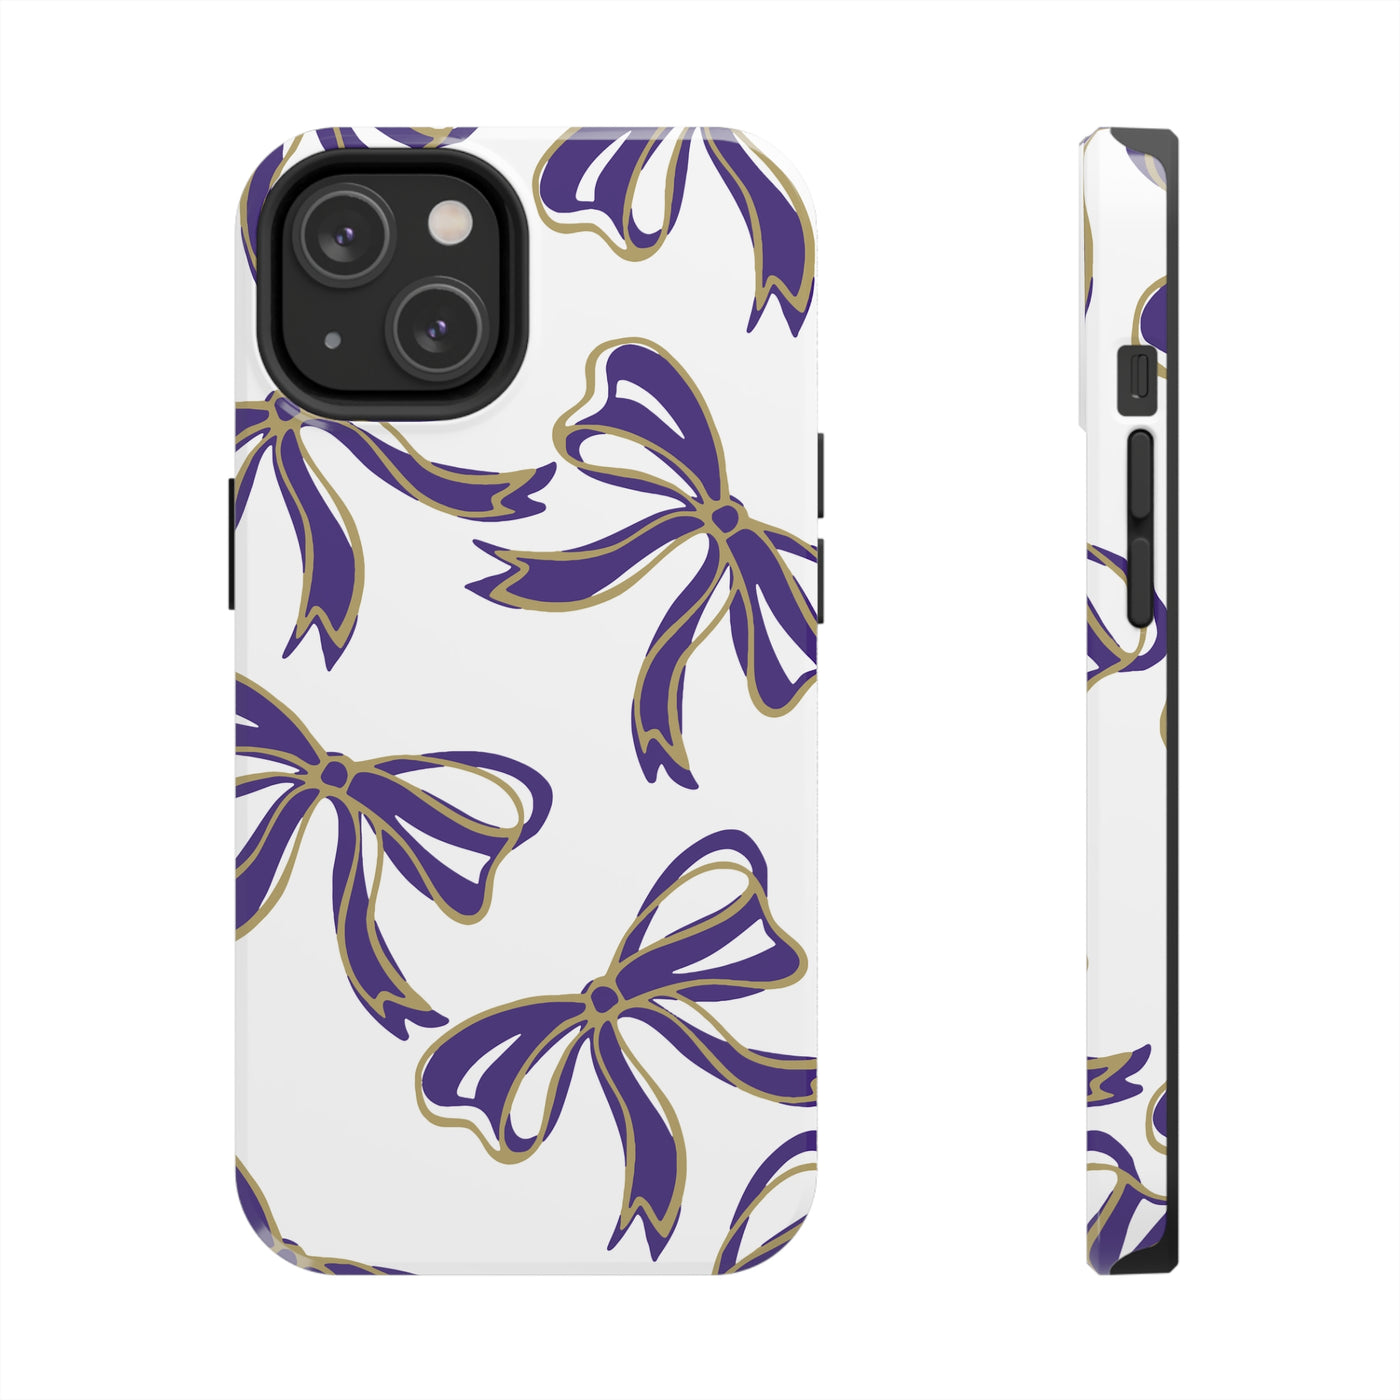 Copy of Trendy Bow Phone Case, Bed Party Bow Iphone case, Bow Phone Case, College Case, Bow Gifts - James Madison - JMU Dukes - Purple and Gold